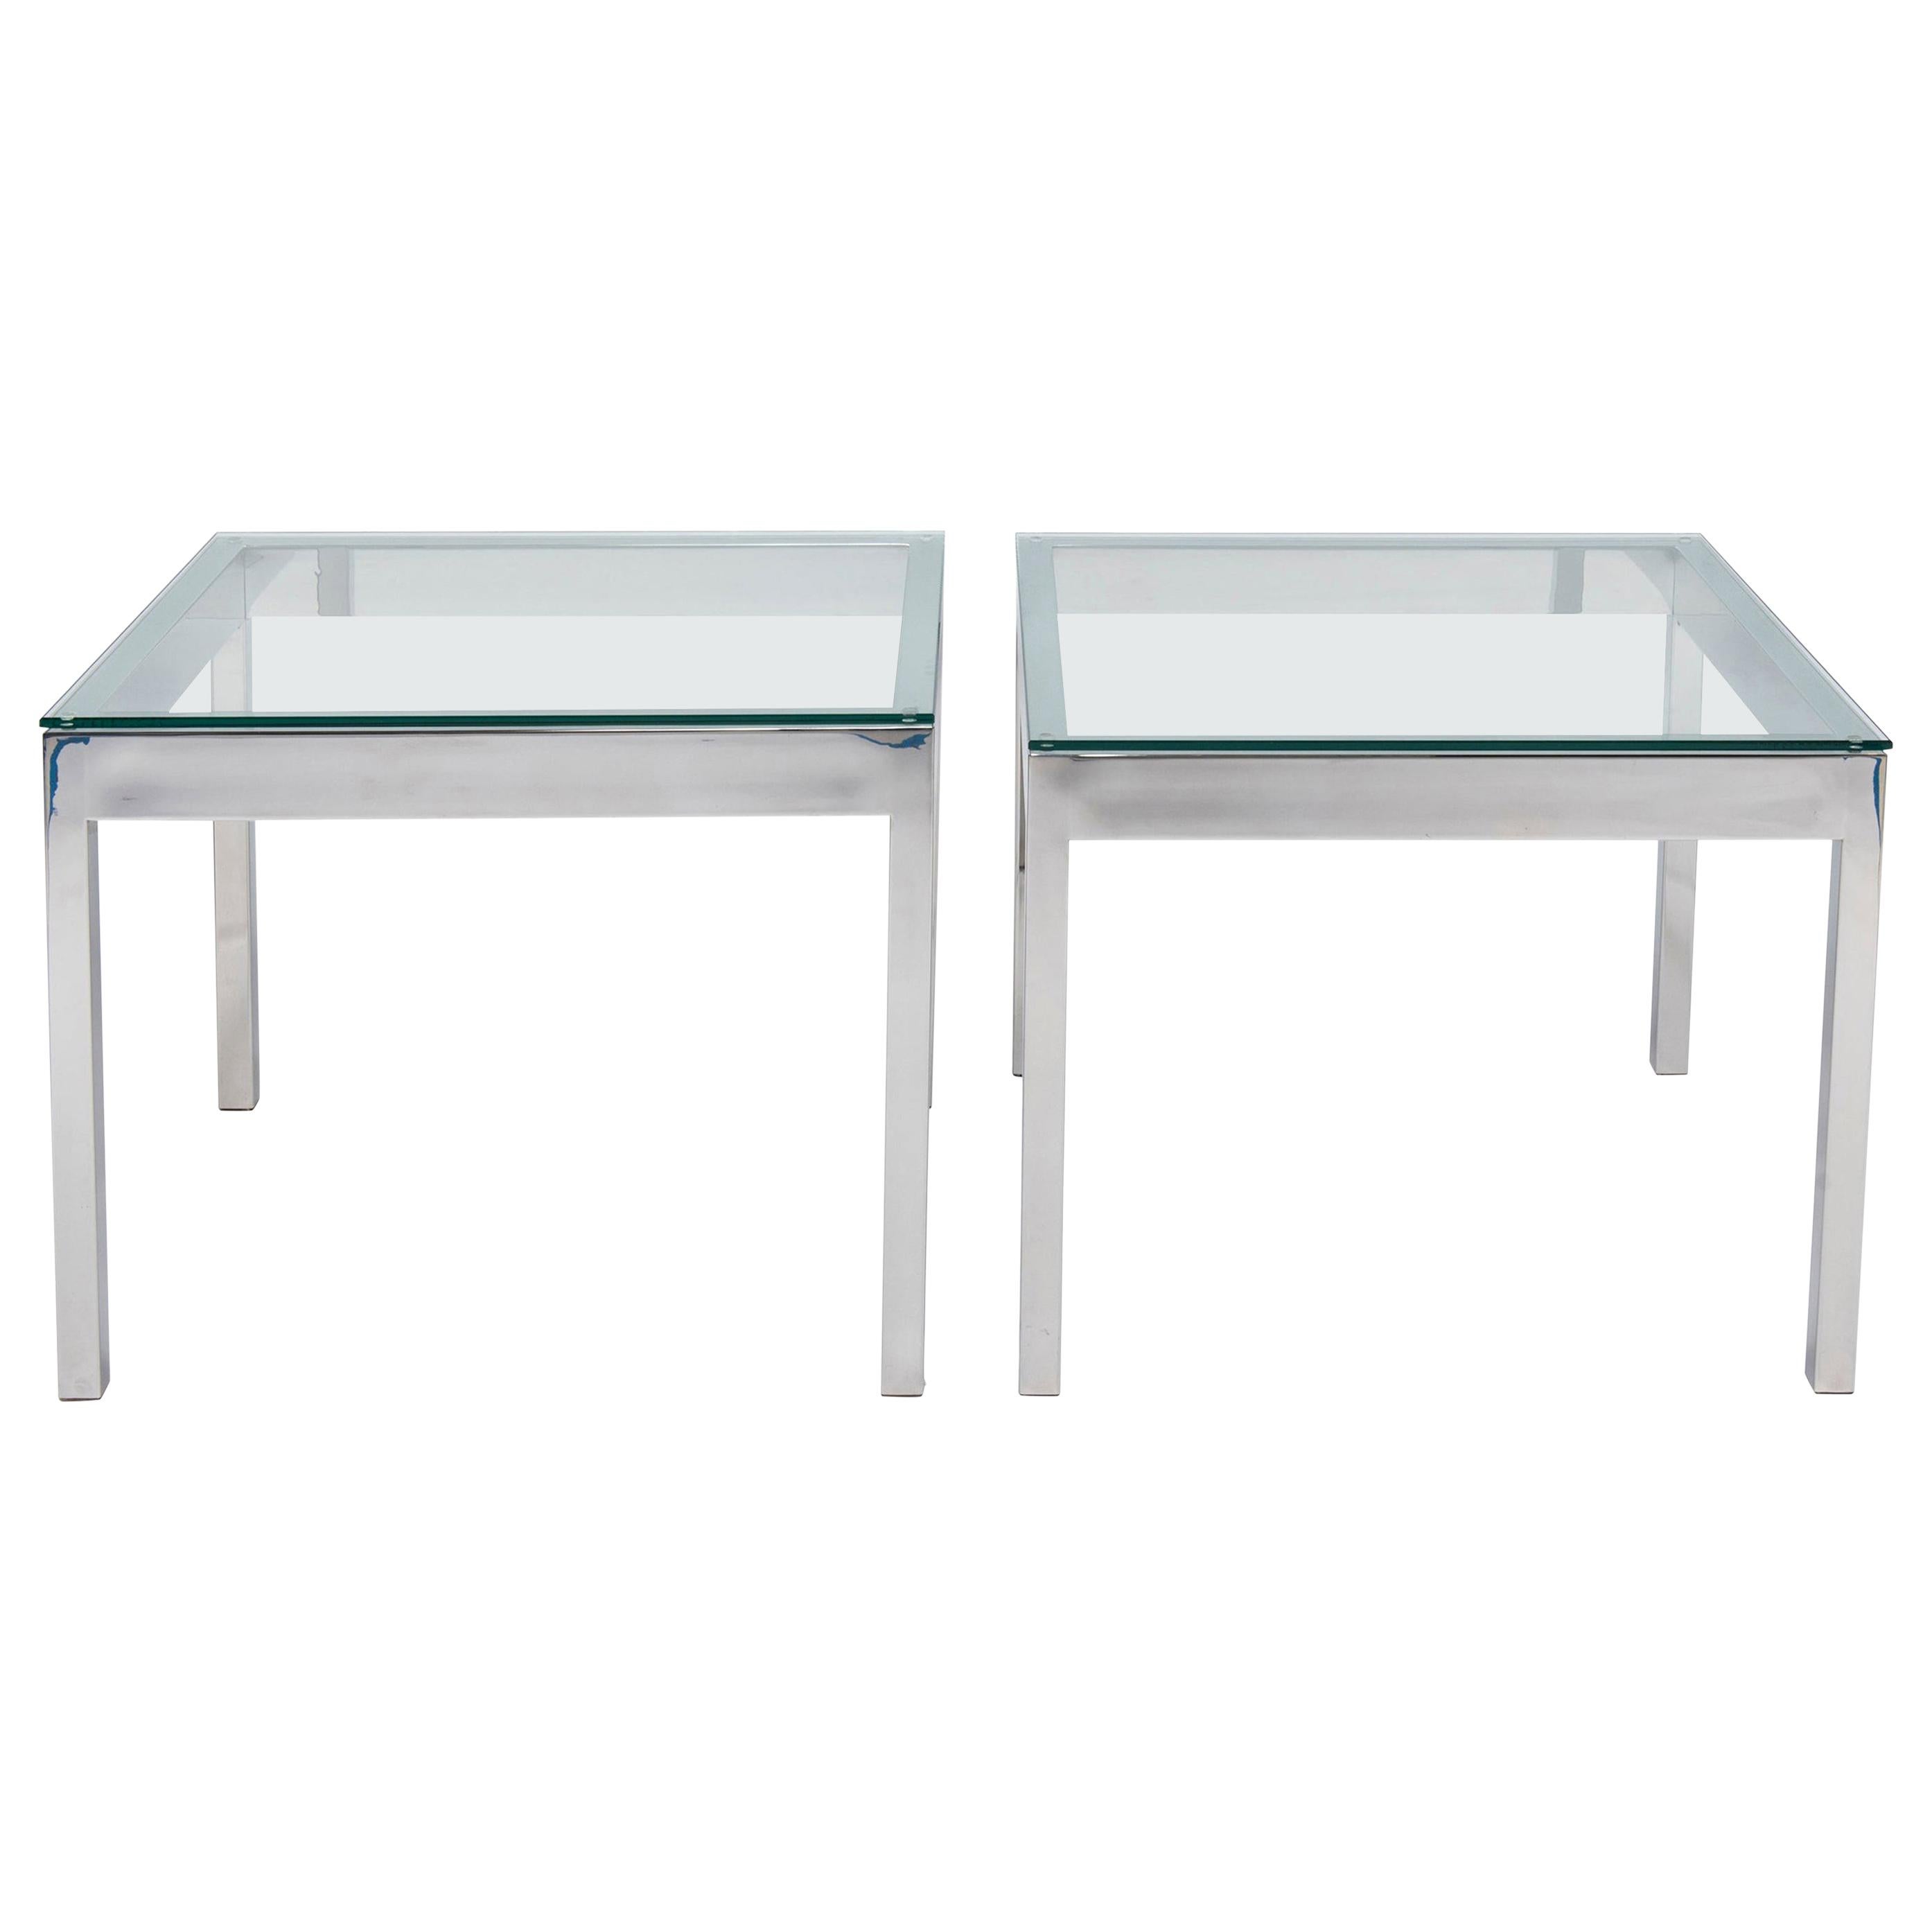 A 1970s near pair of chrome and glass end tables. The tables are close in dimension with new glass tops.
Dimensions:
Table I) 24.5 inches H x 30 inches W x 30 inches D
Table II) 24.5 inches H x 30 inches W x 26 inches D.